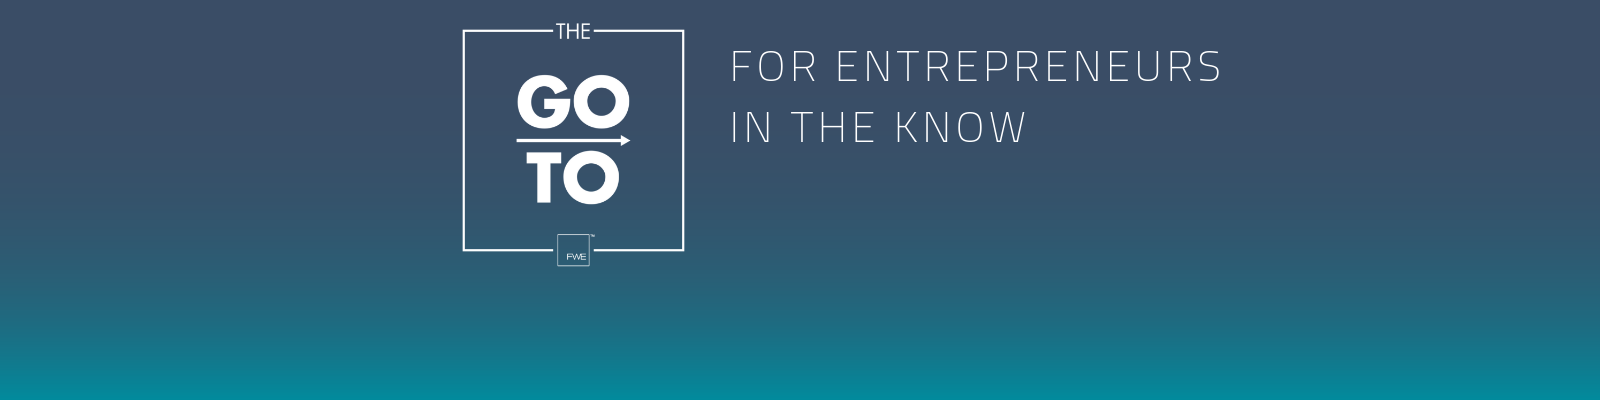 The Go-To: For Entrepreneurs in the Know